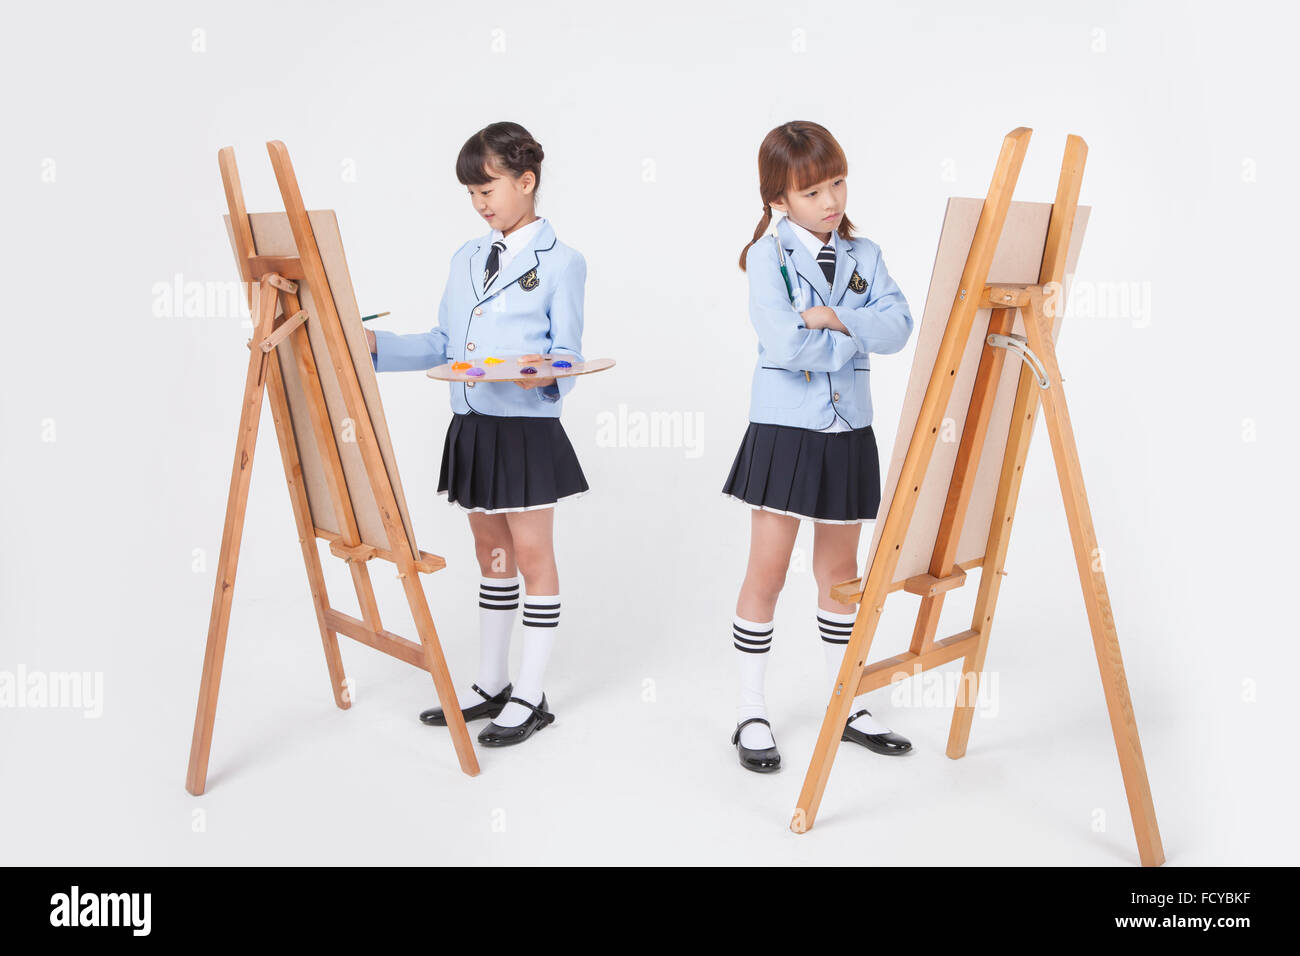 Two elementary school girls in school uniforms standing with an easel each and looking at it Stock Photo